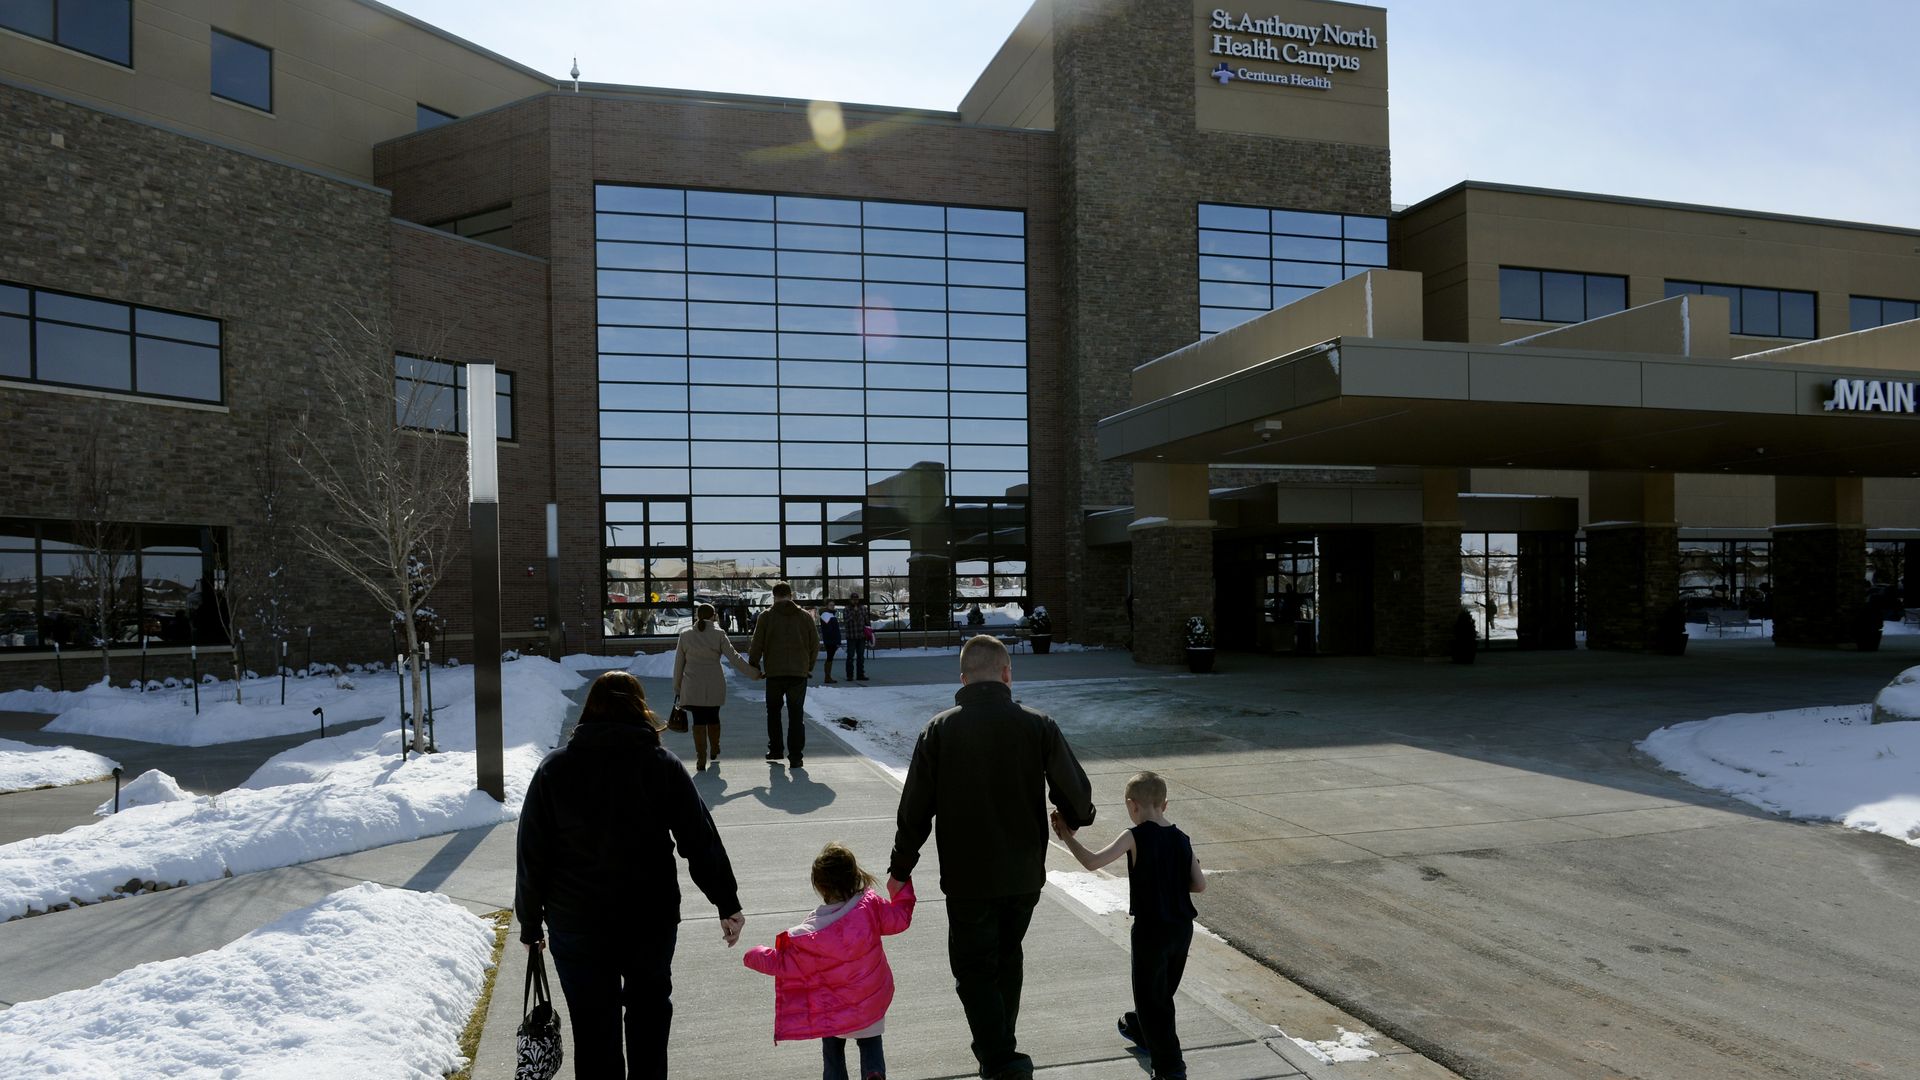 A family walks into the St. Anthony North Hospital in Colorado.